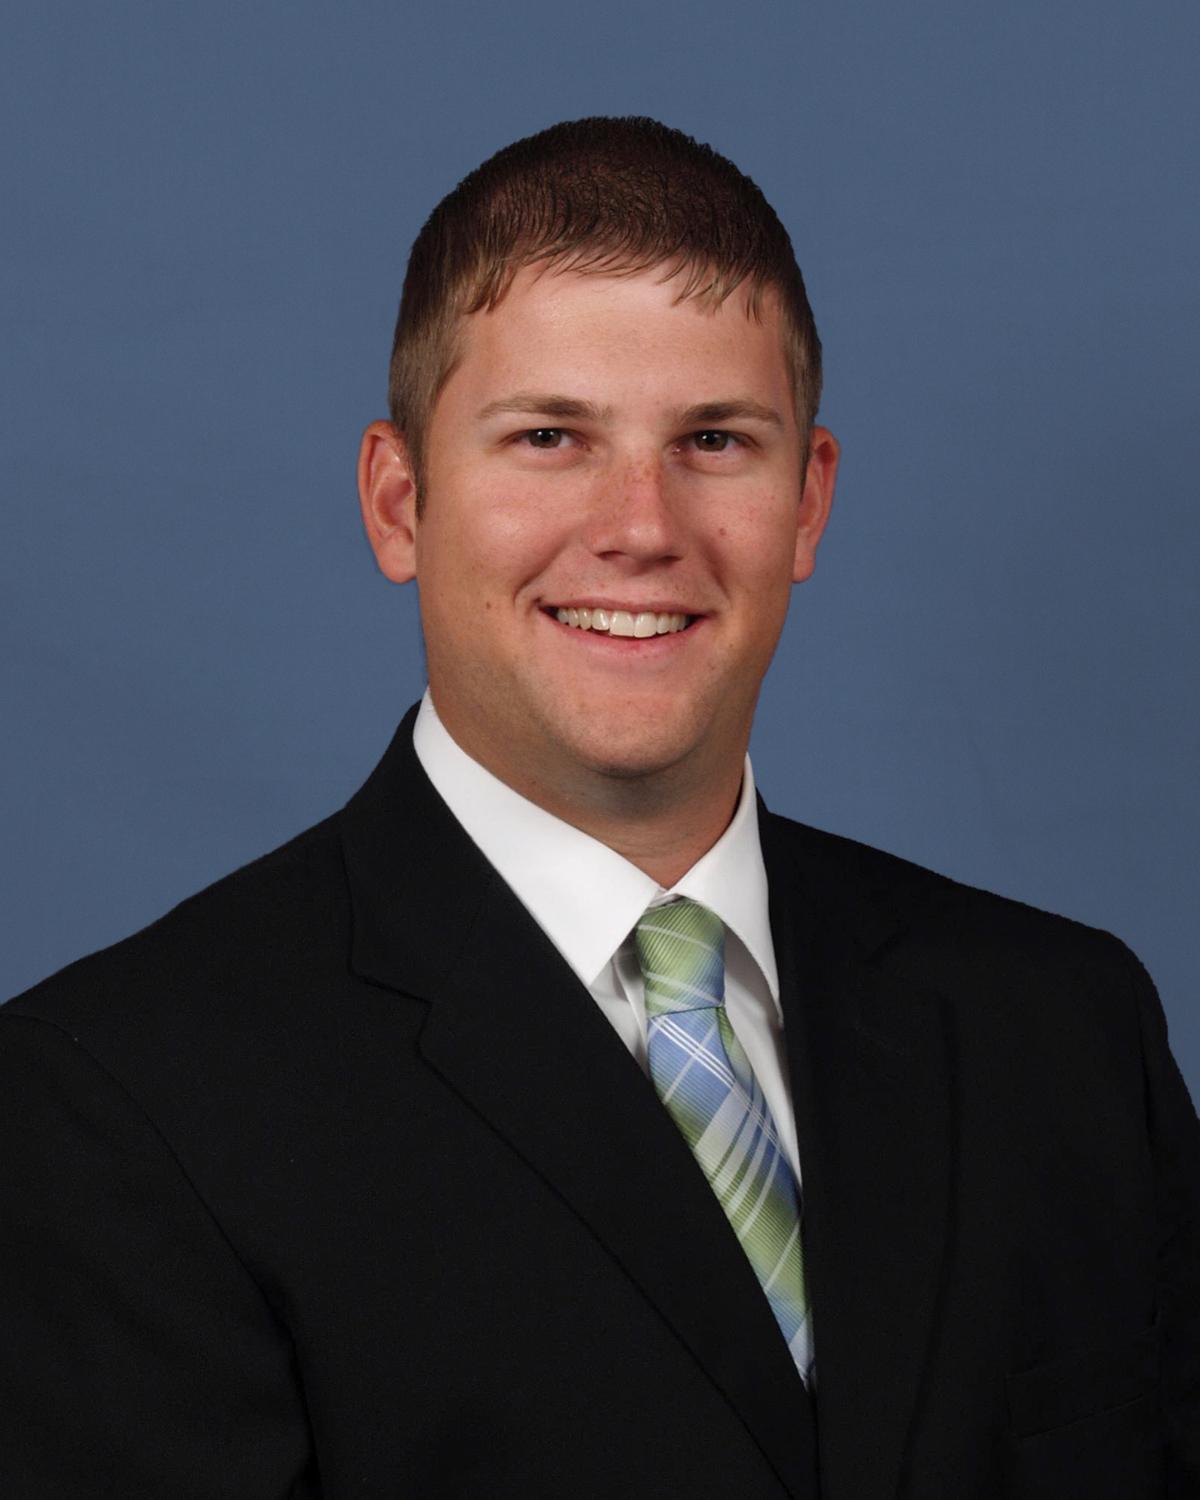 JUSTIN LEE CASEY Financial Professional & Insurance Agent